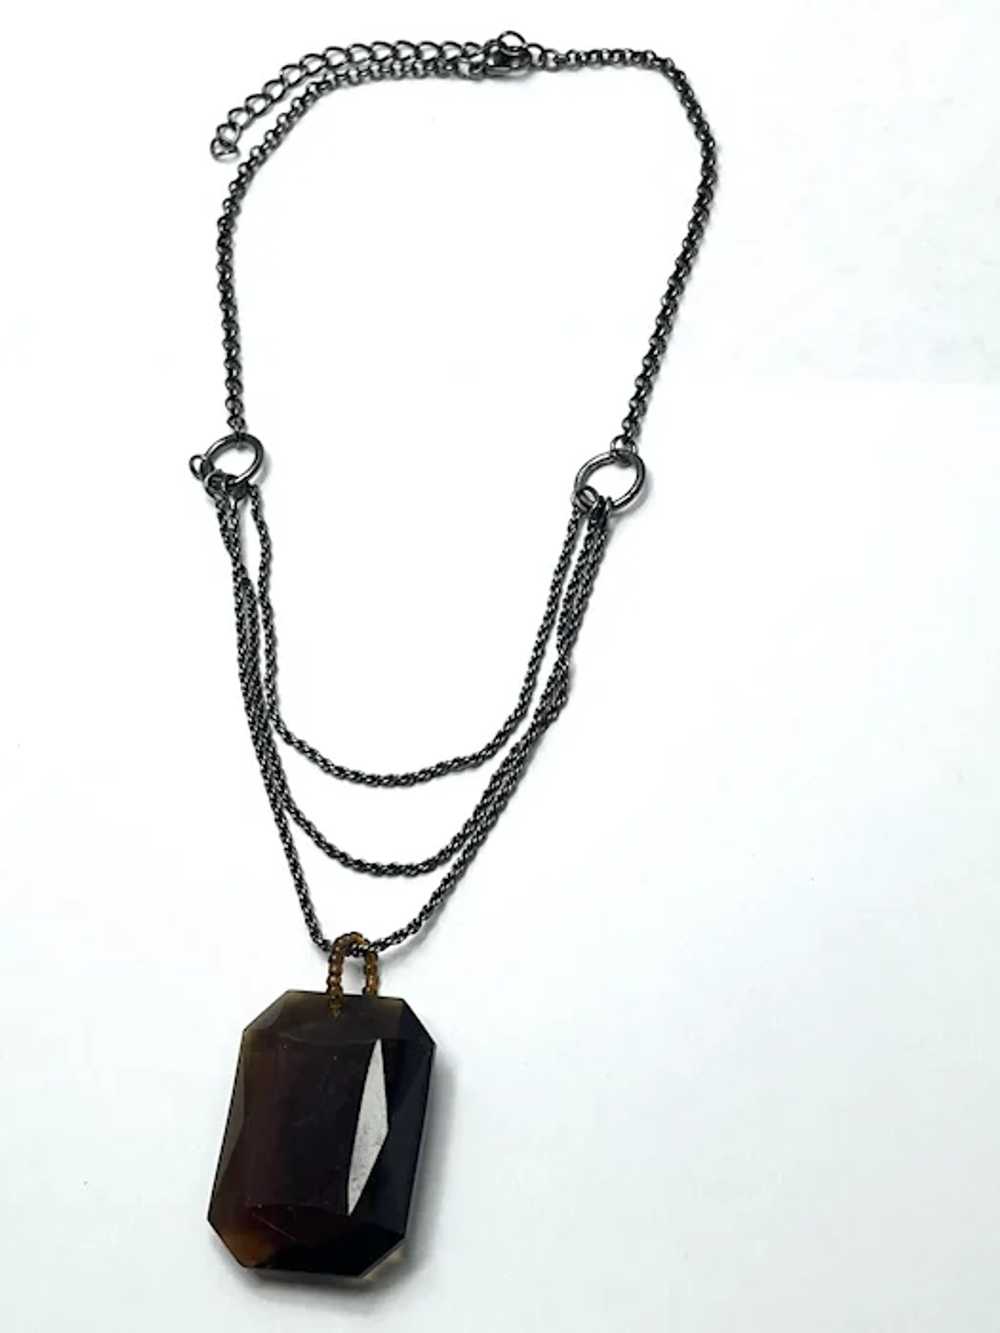 Vintage Crystal Pendant Chain Necklace - image 4